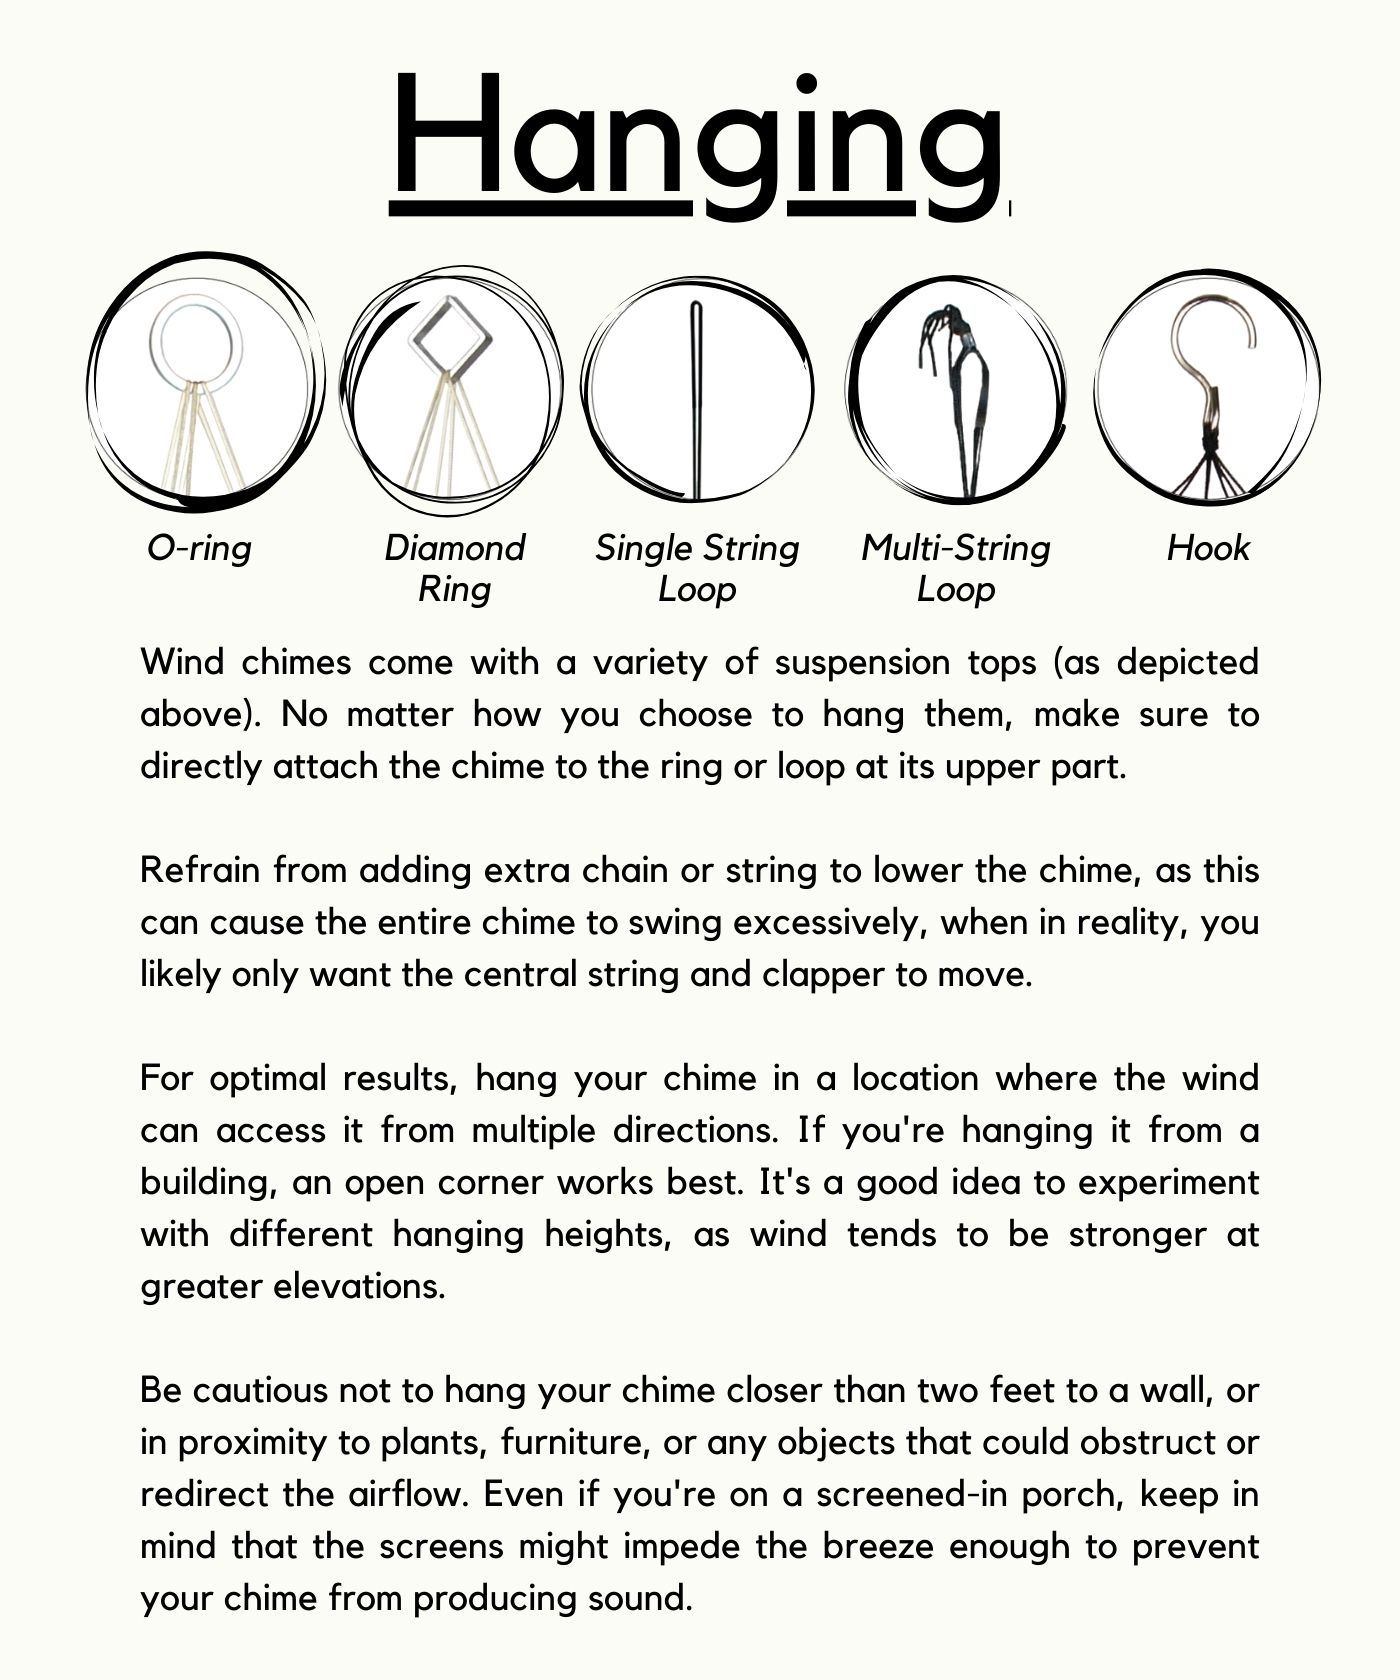 Hanging Wind chimes come with a variety of suspension tops (as depicted above). No matter how you choose to hang them, make sure to directly attach the chime to the ring or loop at its upper part. Refrain from adding extra chain or string to lower the chime, as this can cause the entire chime to swing excessively, when in reality, you likely only want the central string and clapper to move. For optimal results, hang your chime in a location where the wind can access it from multiple directions. If you're hanging it from a building, an open corner works best. It's a good idea to experiment with different hanging heights, as wind tends to be stronger at greater elevations. Be cautious not to hang your chime closer than two feet to a wall, or in proximity to plants, furniture, or any objects that could obstruct or redirect the airflow. Even if you're on a screened-in porch, keep in mind that the screens might impede the breeze enough to prevent your chime from producing sound.